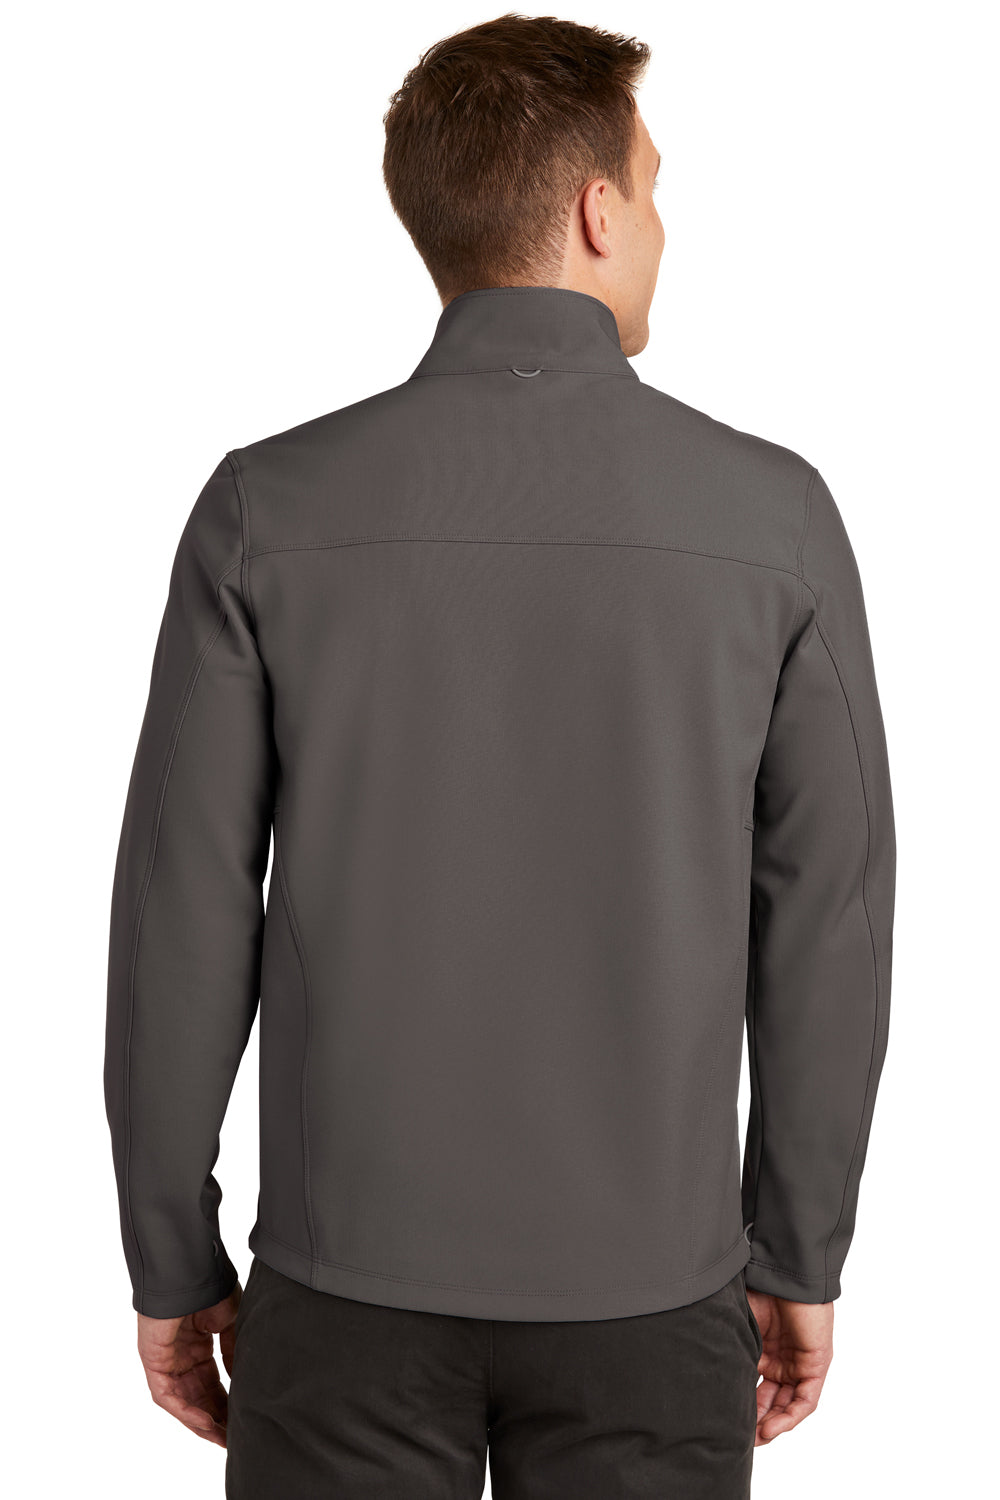 Port Authority J901 Mens Collective Wind & Water Resistant Full Zip Jacket Graphite Grey Back